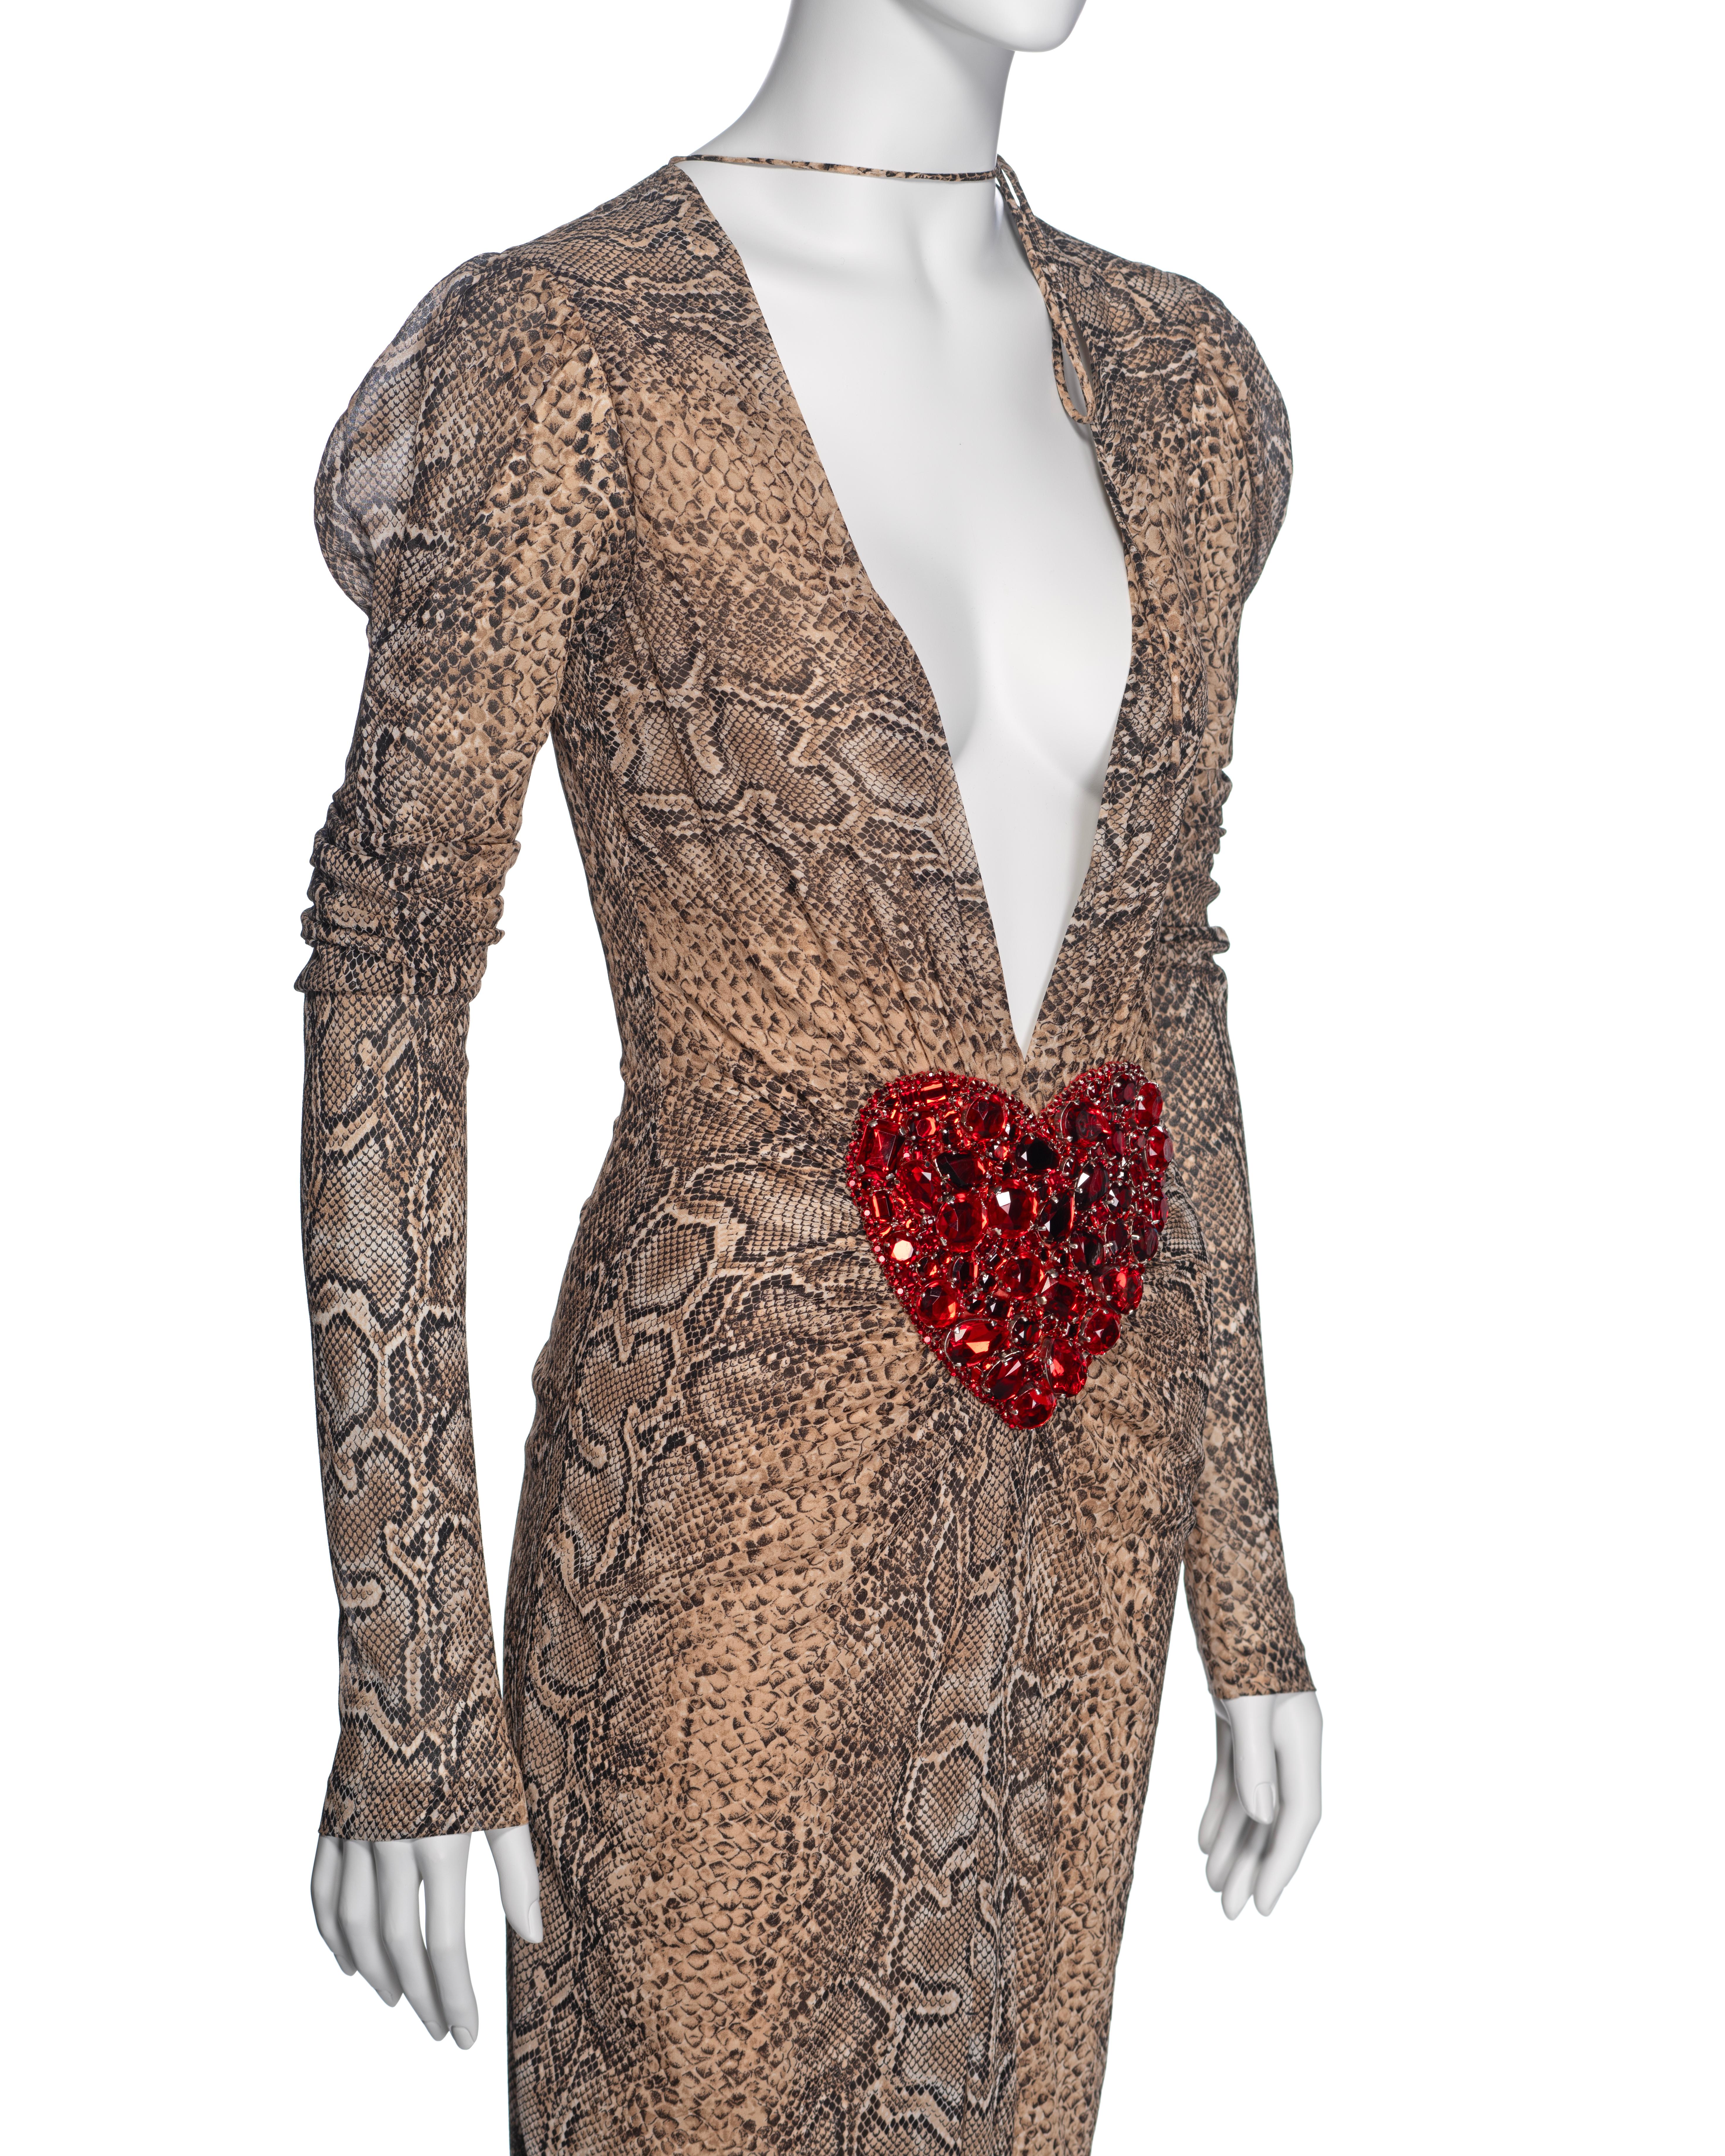 Dolce & Gabbana Snakeskin Print Low Plunge Dress with Crystal Heart, SS 2005 For Sale 3